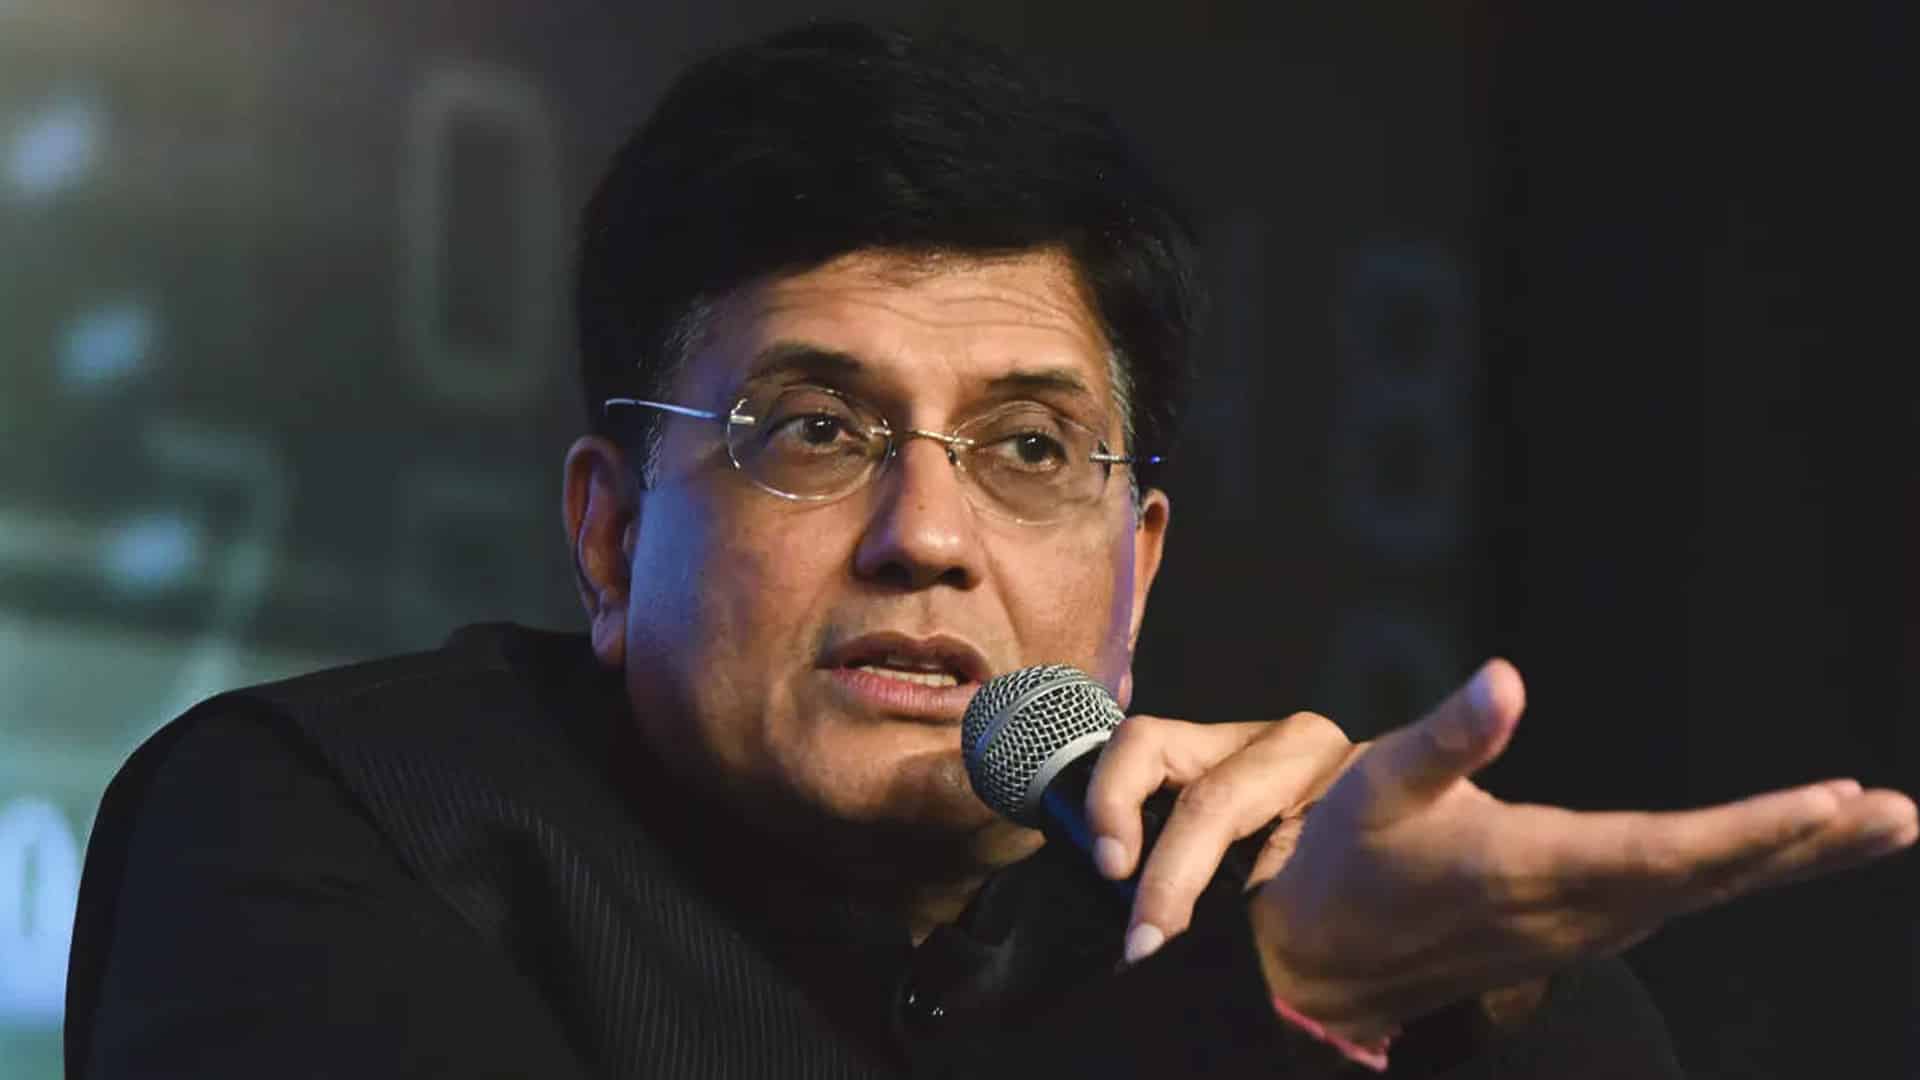 Huge opportunities for Korean firms in India's startup ecosystem: Goyal